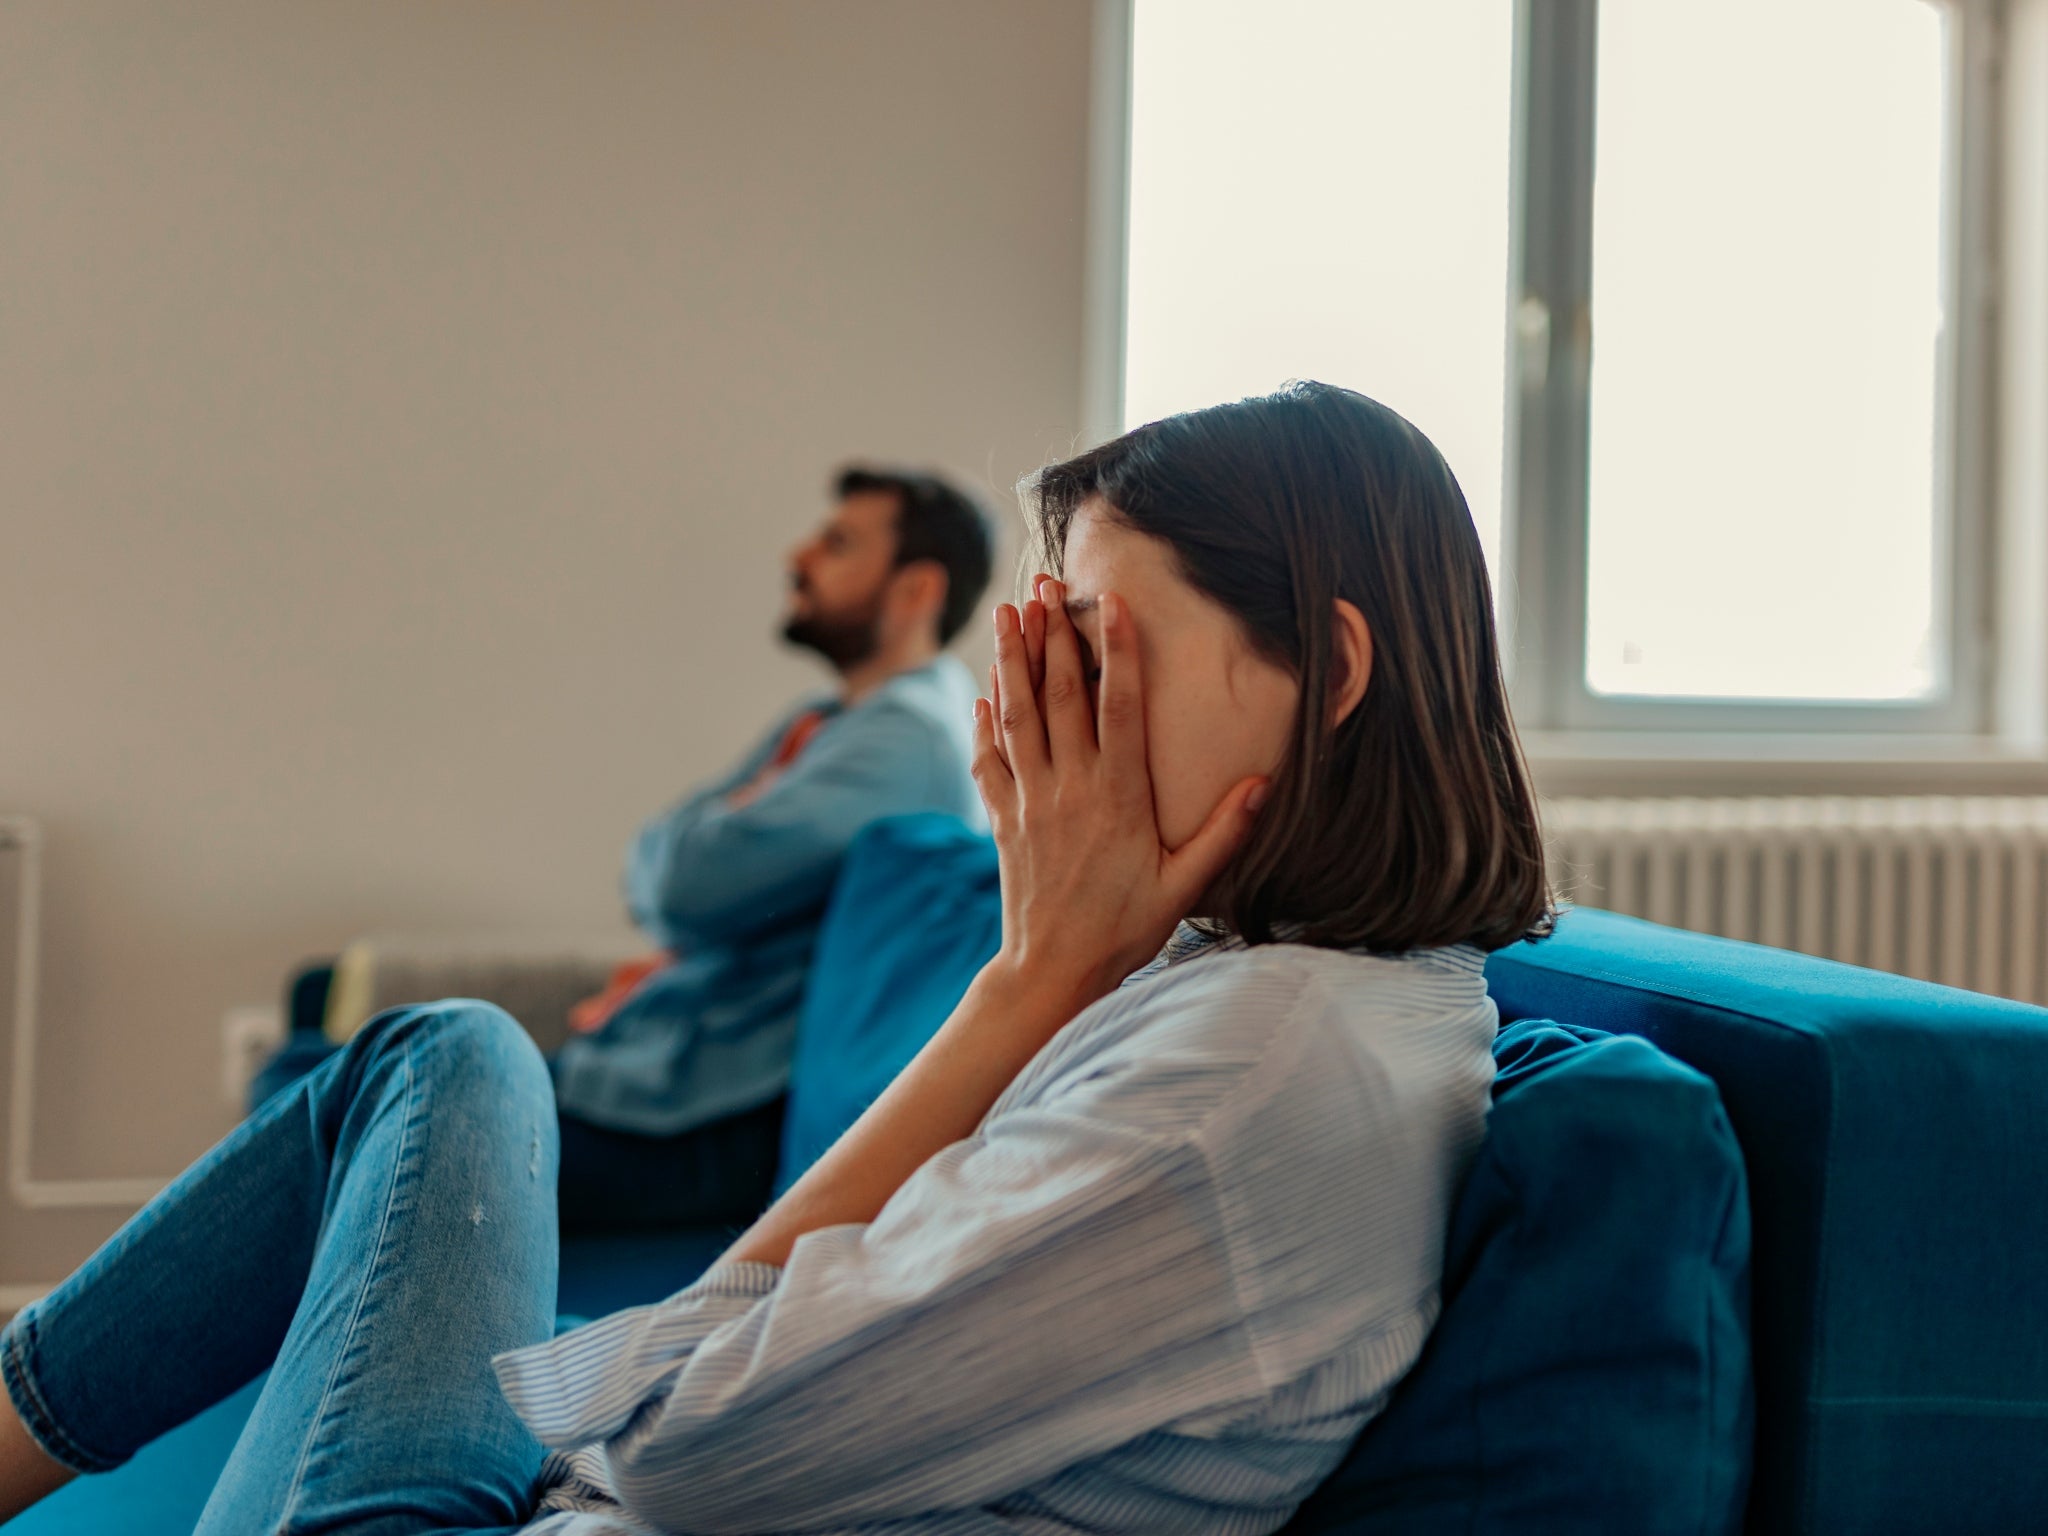 Research by Stowe Family Law, which has around 40 offices around the UK, found just over half of UK couples say there is tension in their relationship as a result of the cost of living crisis